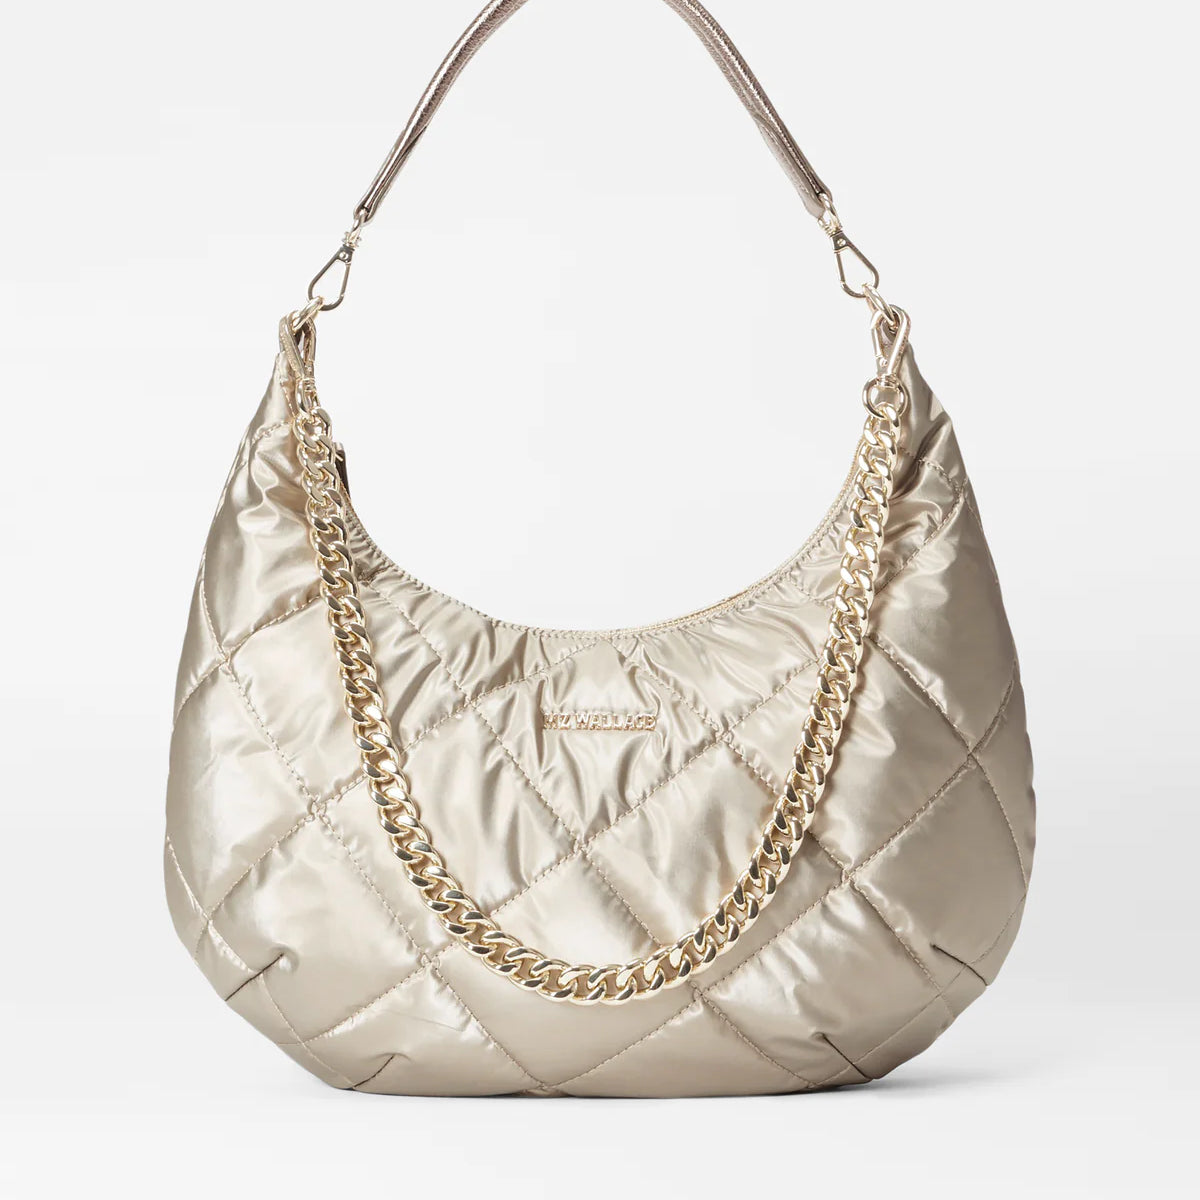 'MZ Wallace' Quilted Madison Shoulder Bag II